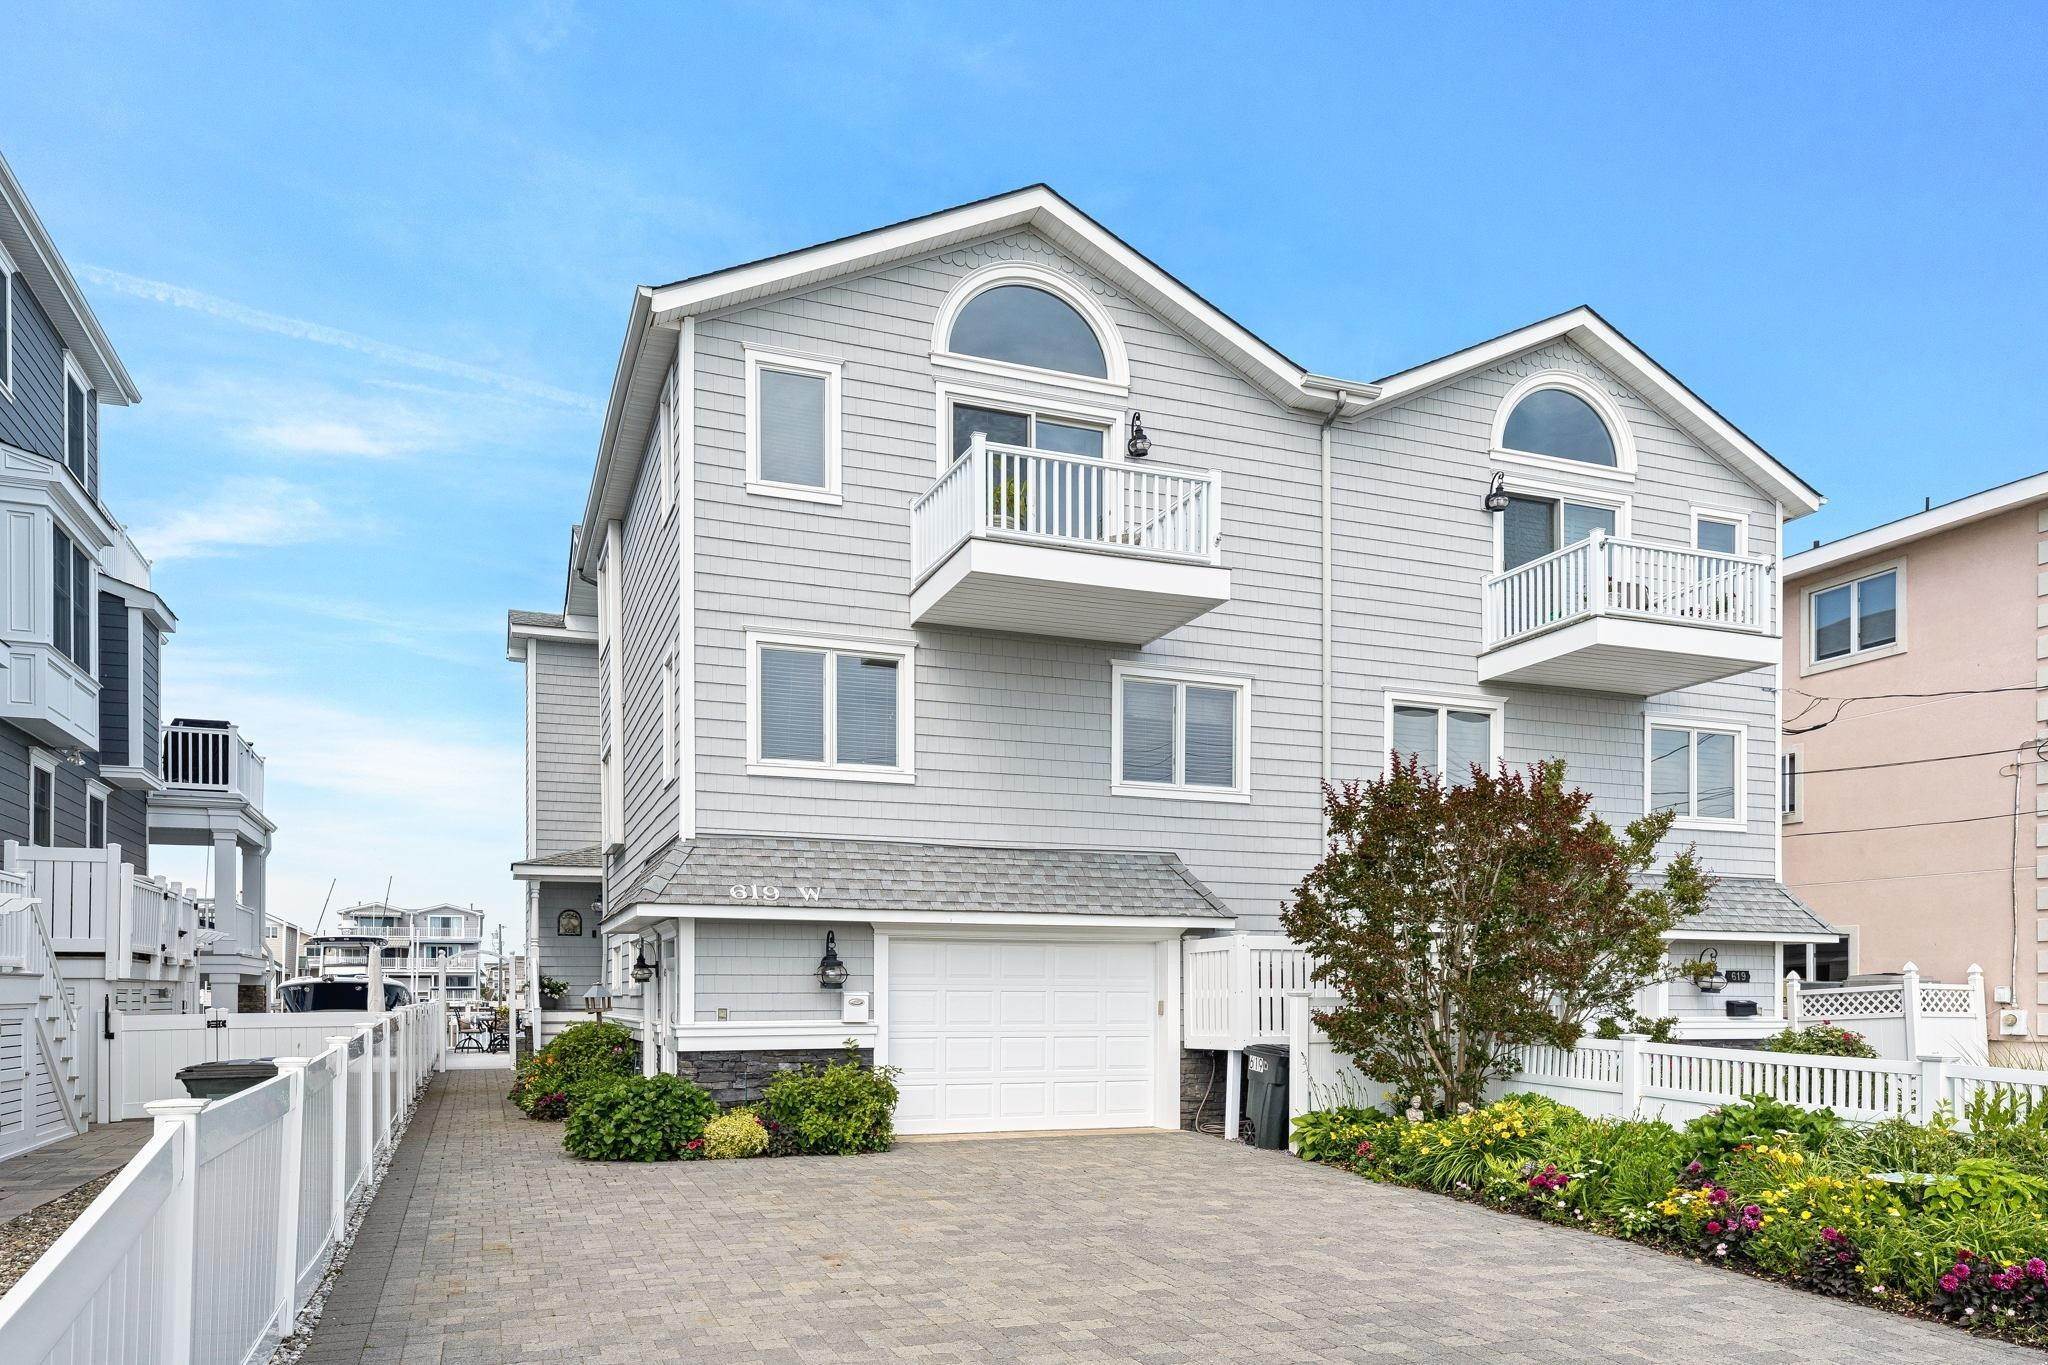 Condominiums for Sale at 619 24th Street Avalon, New Jersey 08202 United States